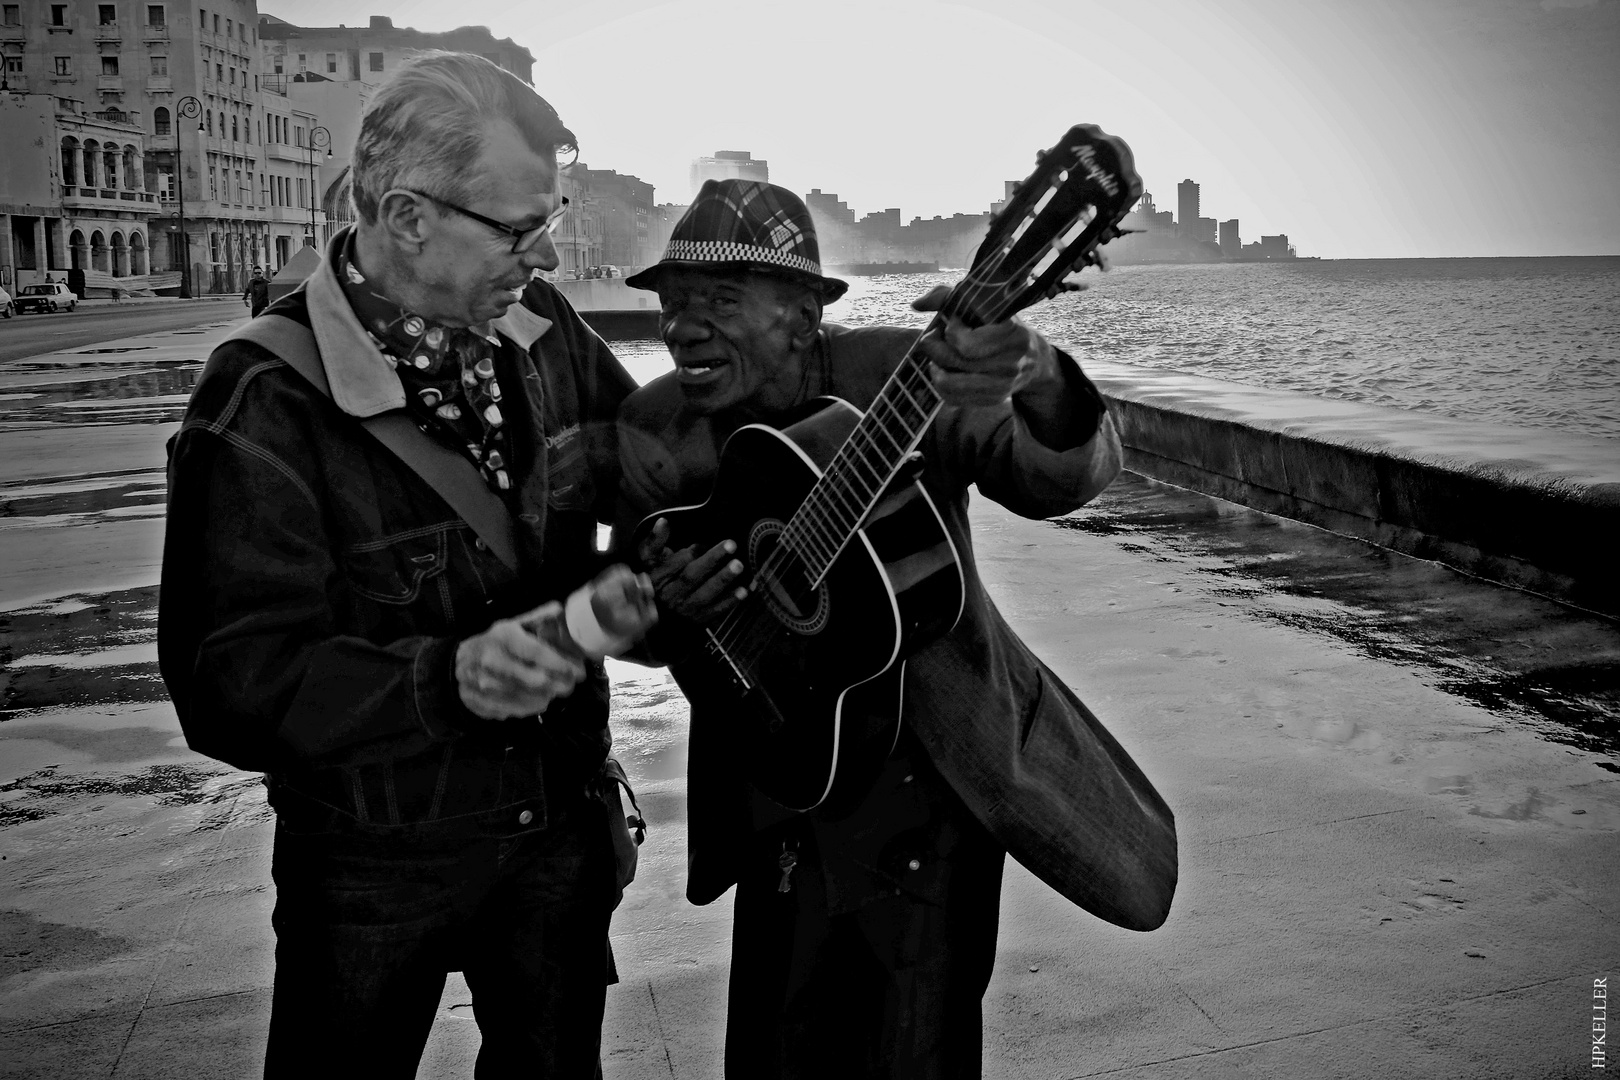 A few weeks ago in Havanna, ...in the footsteps of the "Buena Vista Social Club".